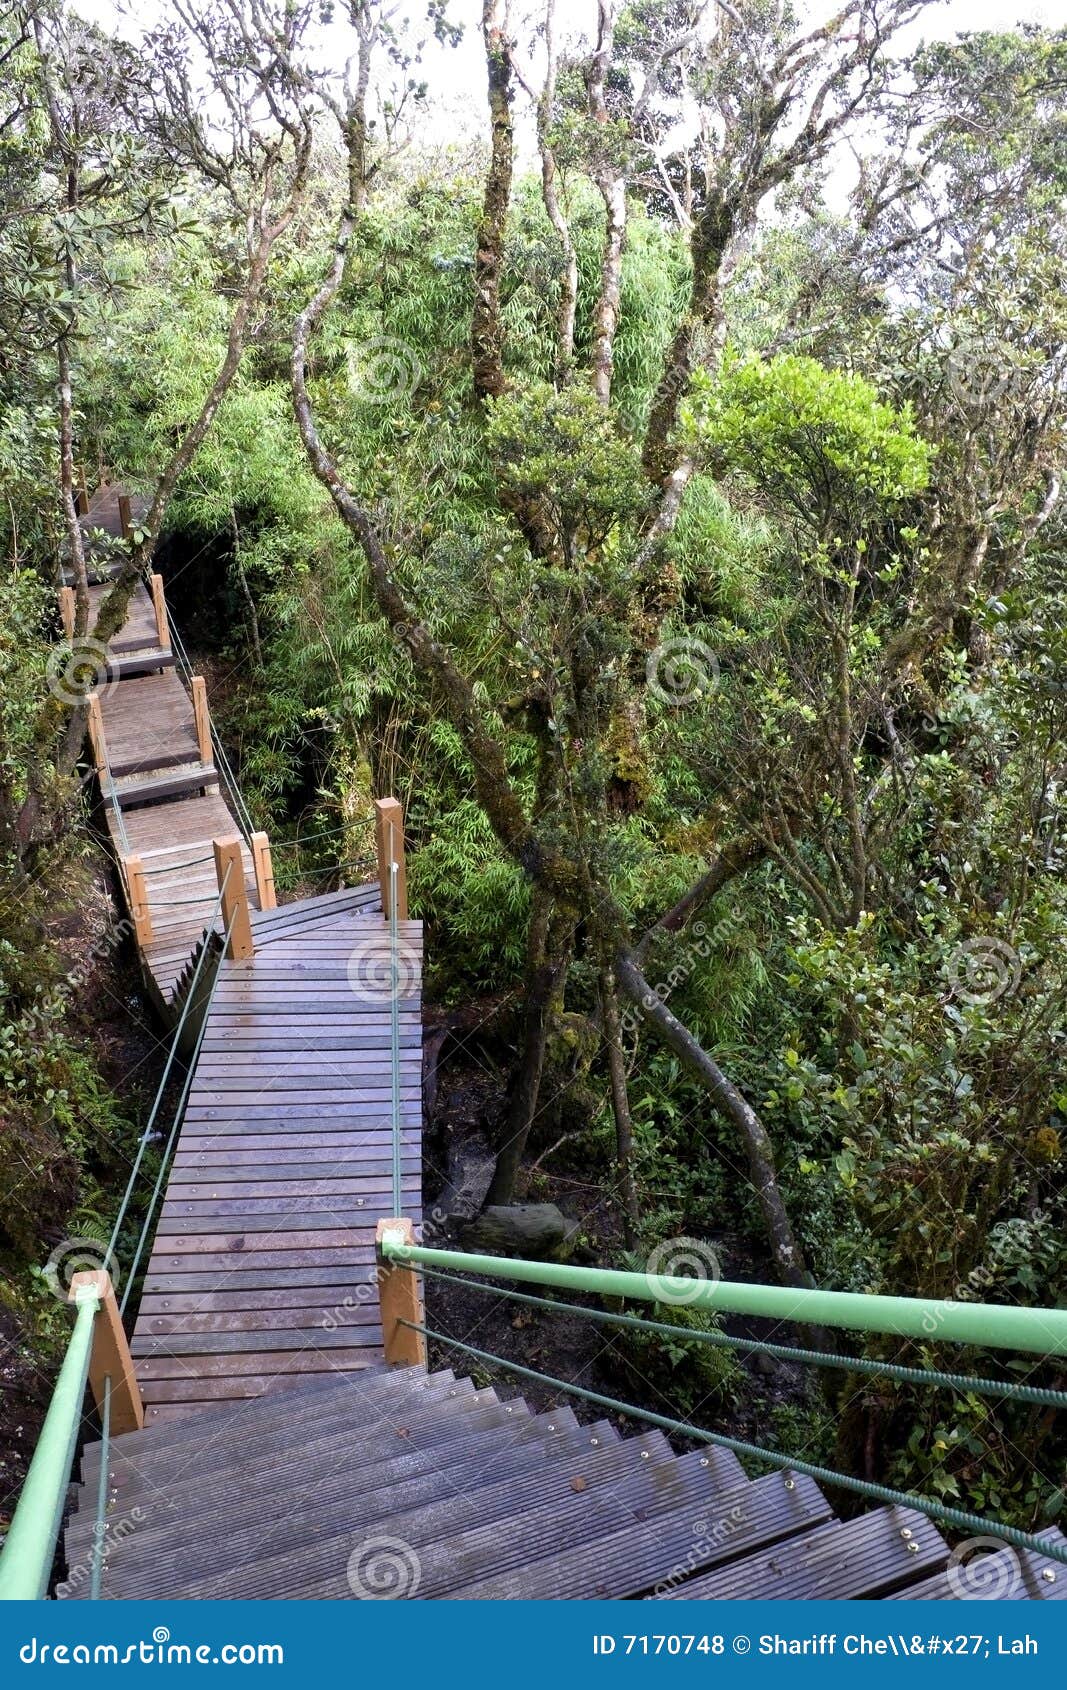 walkway through world's oldest mossy forest